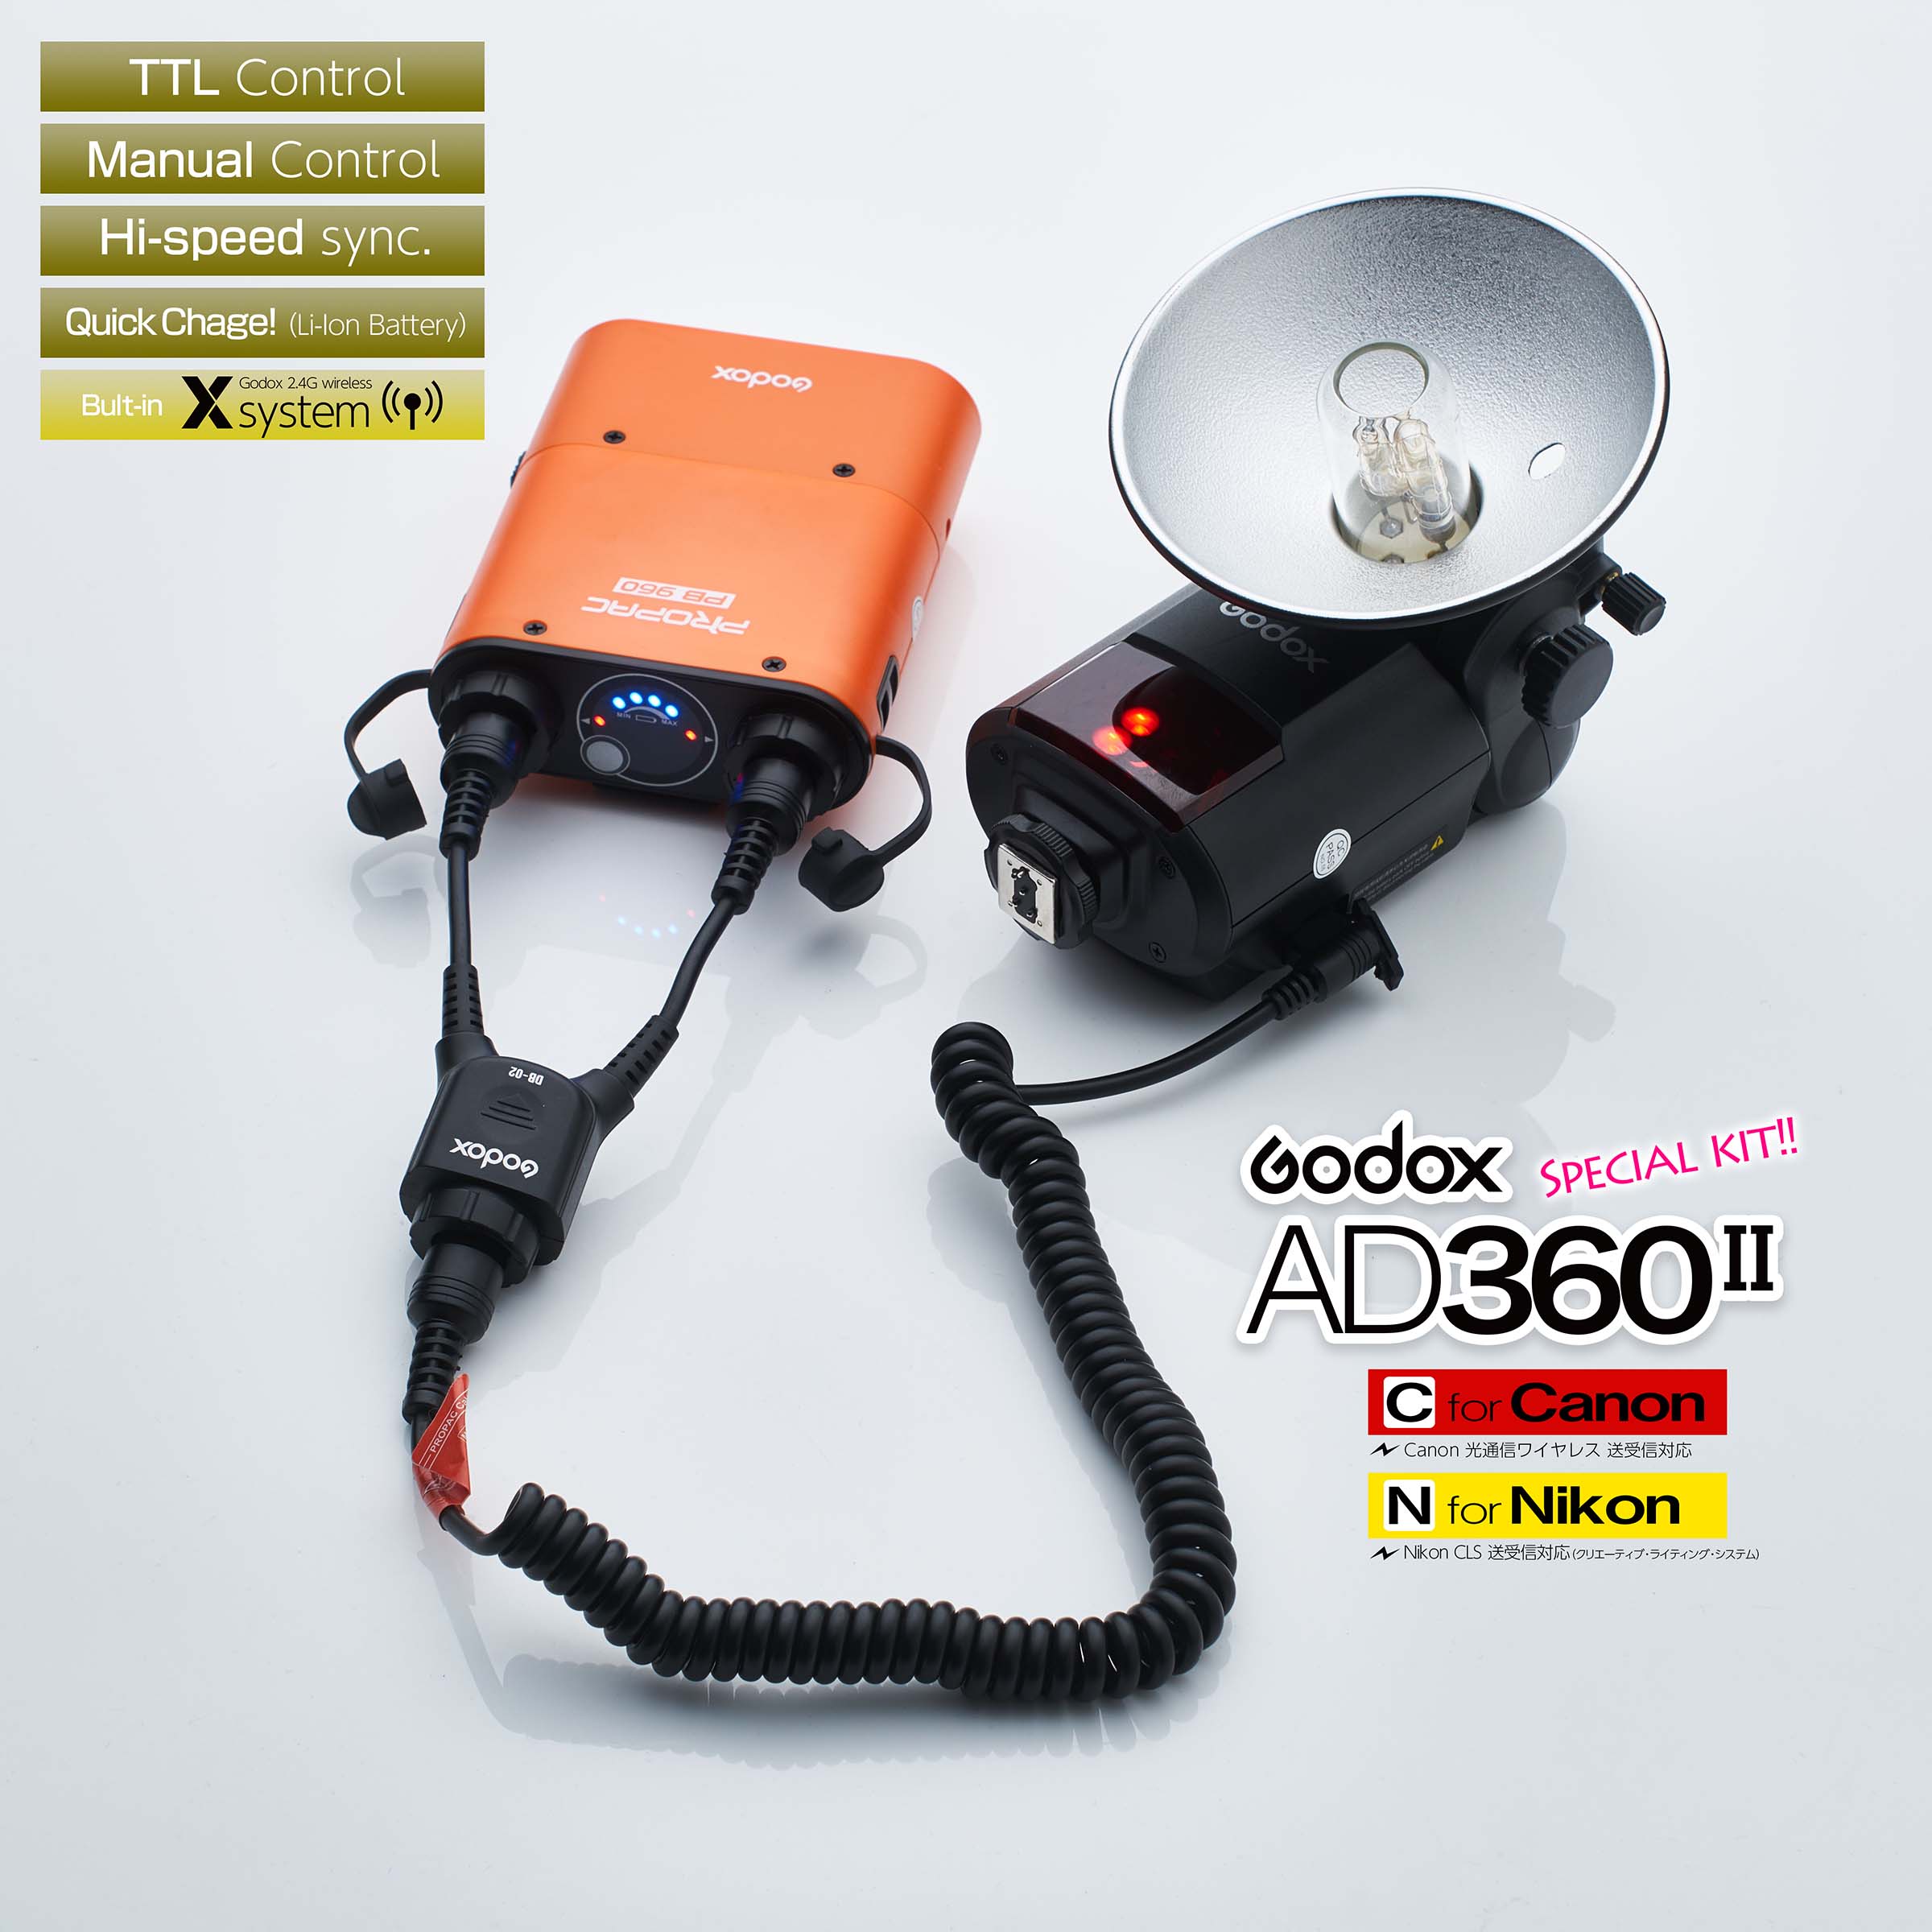 360Wsバッテリーストロボ 「Godox AD360 Ⅱ SPECIALキット」 for Canon 